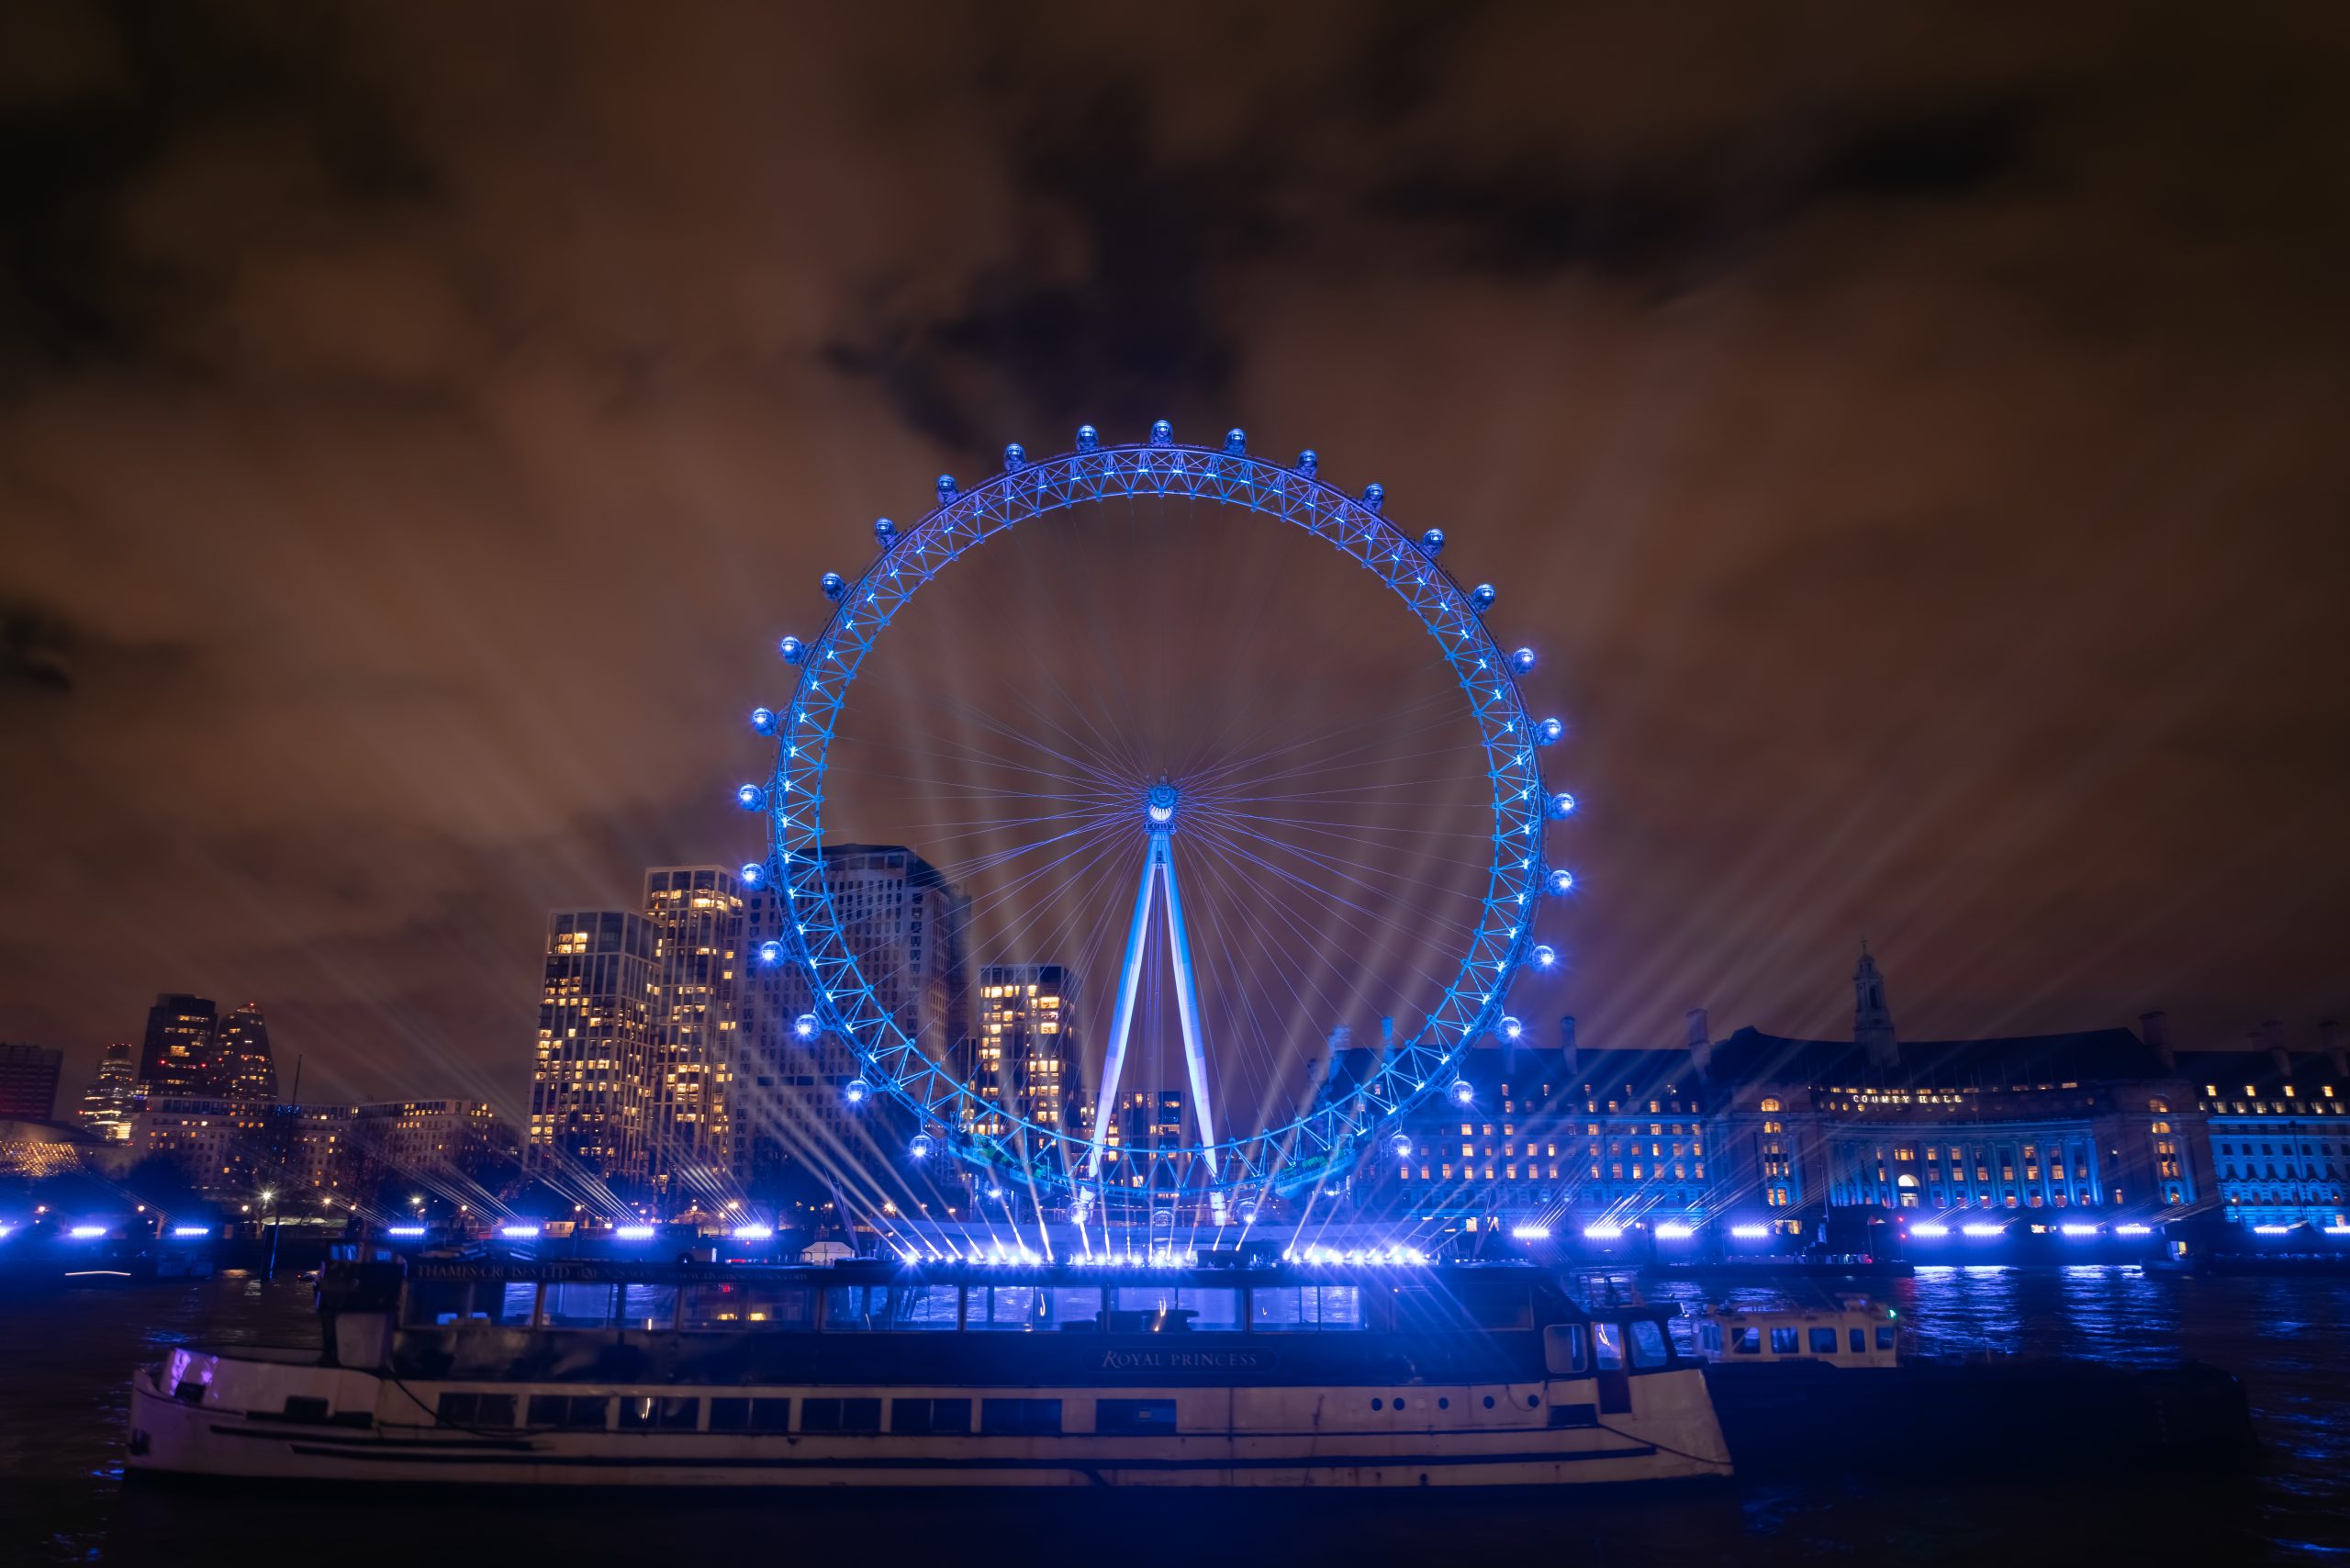 The London Eye lit up at night